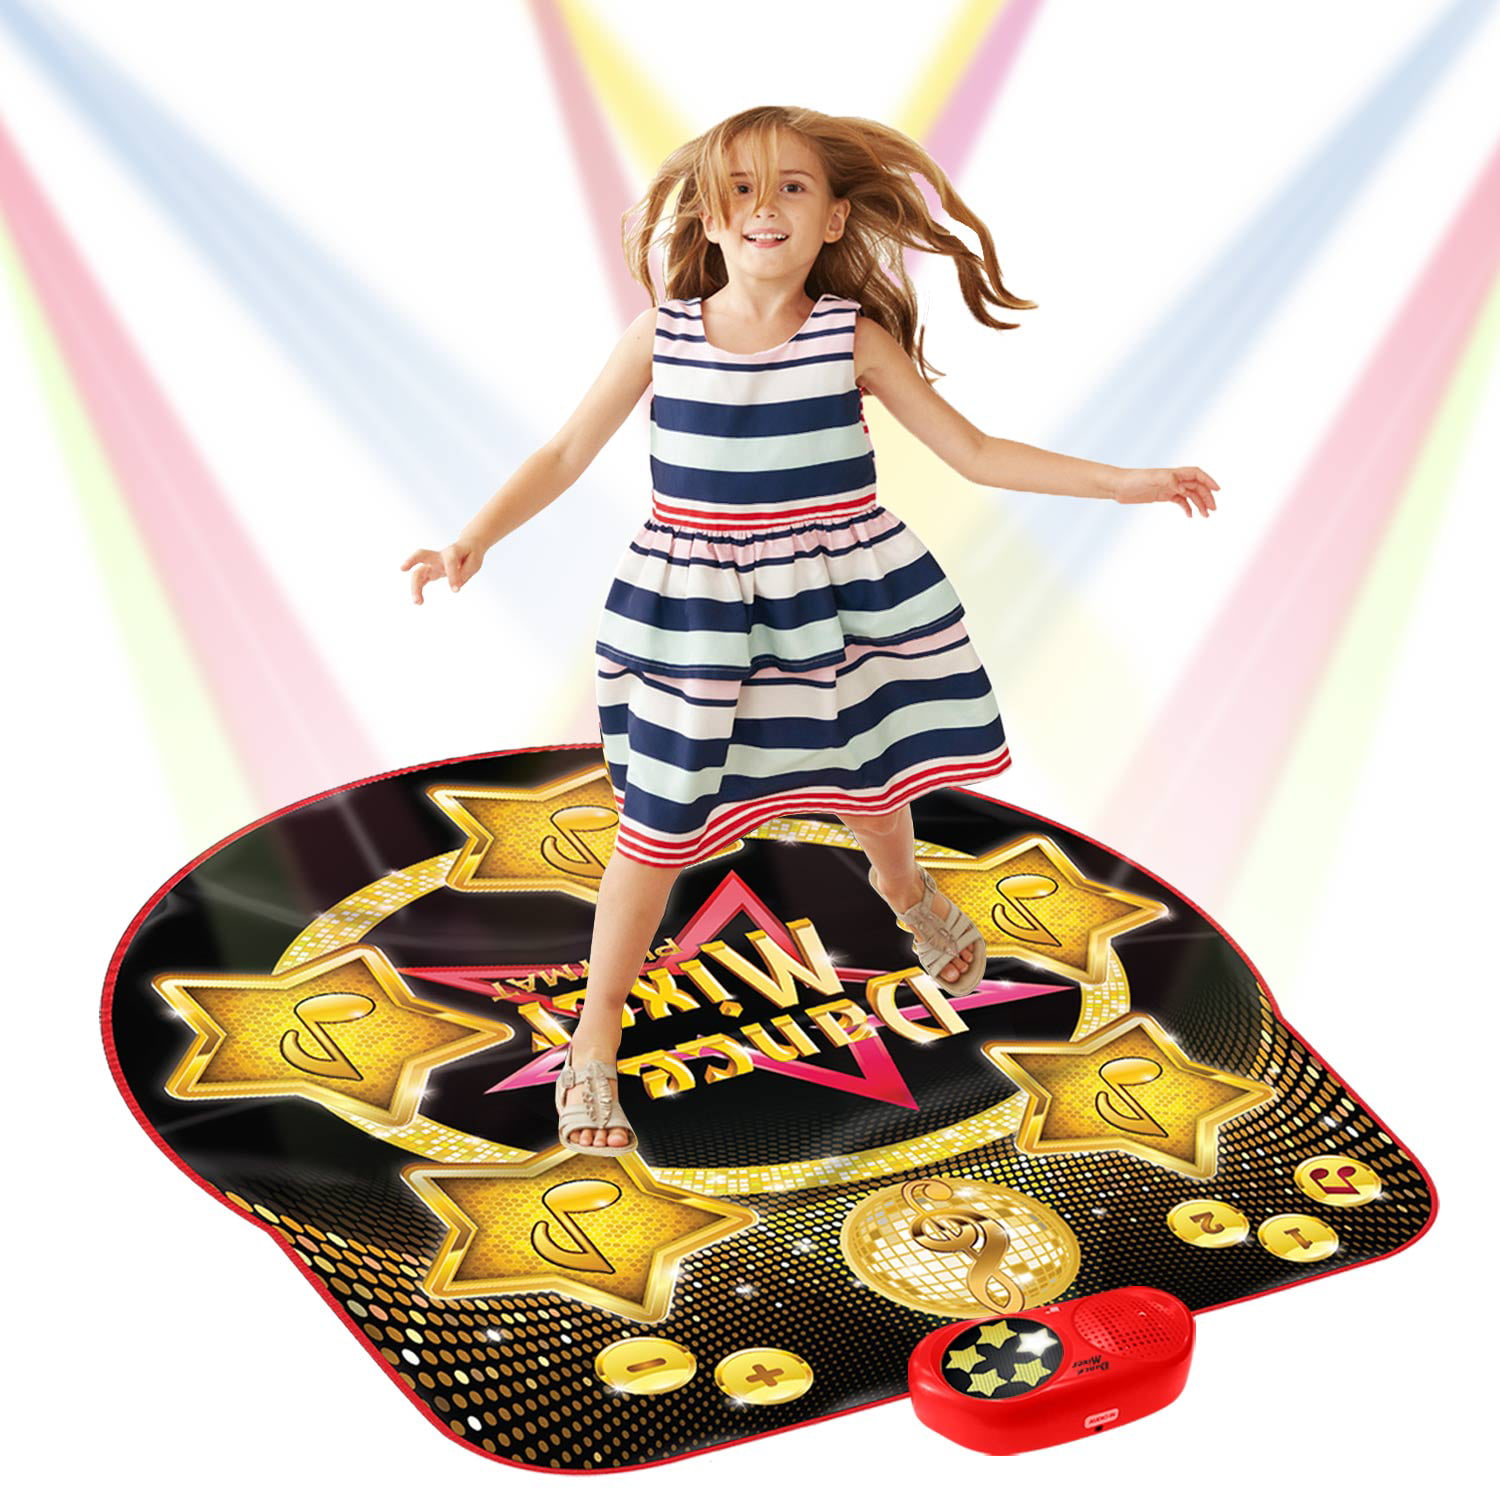 Dance Mat Adjustable Volume Built-in Music Dance Pad with LED Lights 3 Challenge Levels Musical Mat Dance Mixer Step Play Mat Electronic Dance Mats Game Toy Gift for Kids Boys Girls 